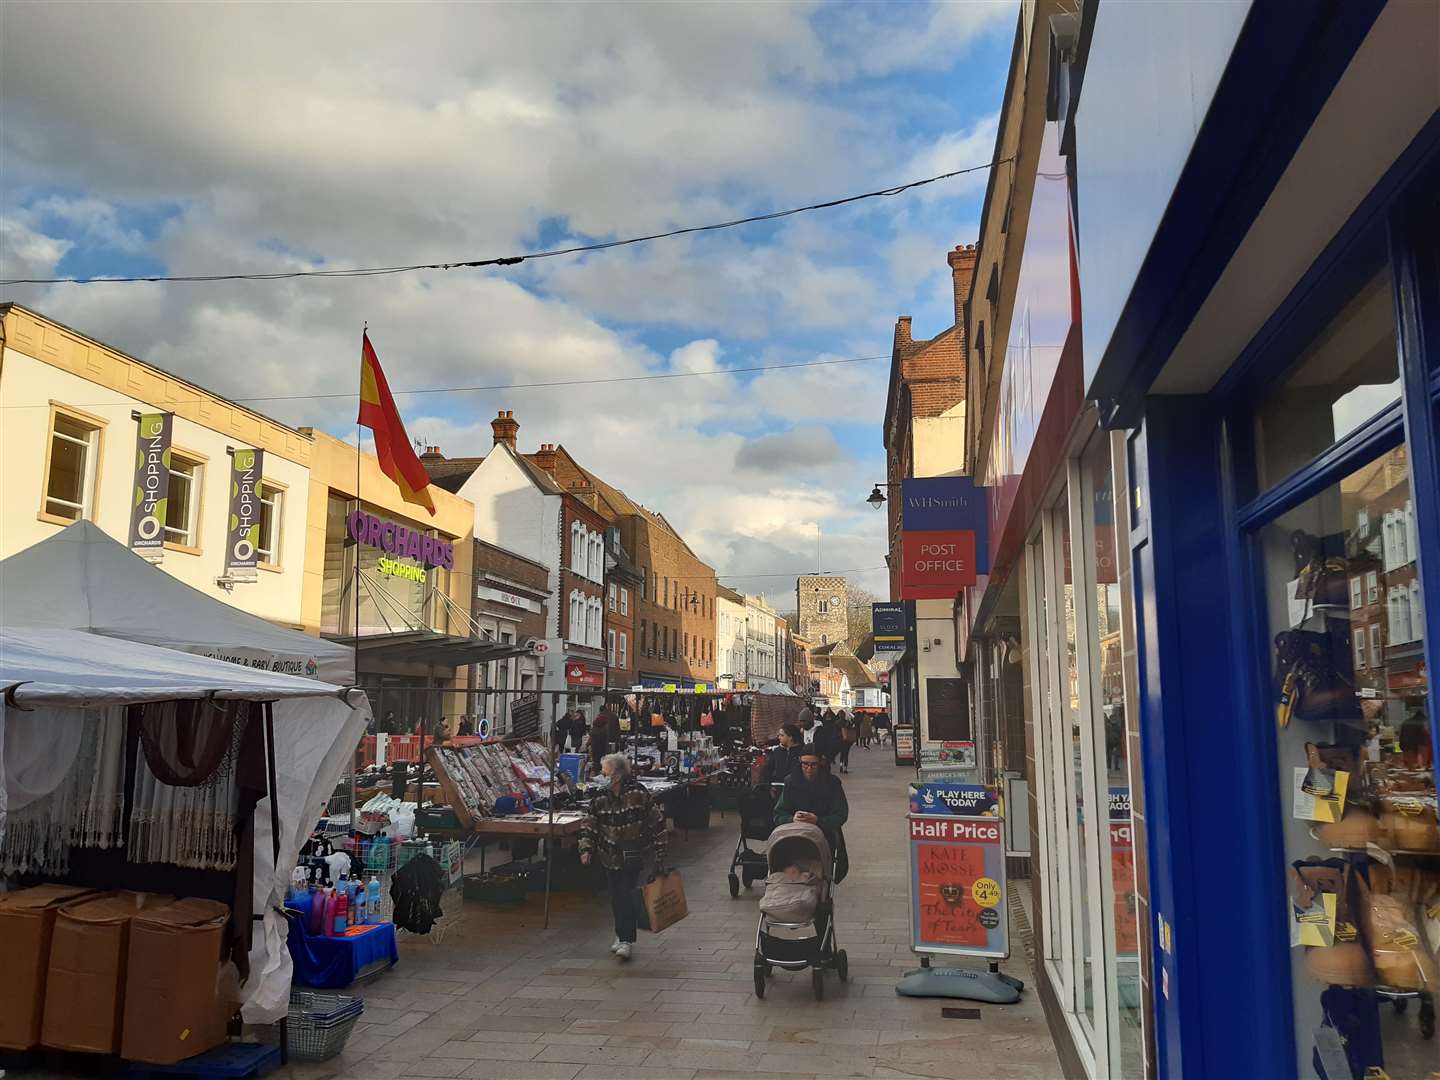 Dartford's markets are back but traders say footfall has not returned to pre-pandemic levels. Photo: Sean Delaney